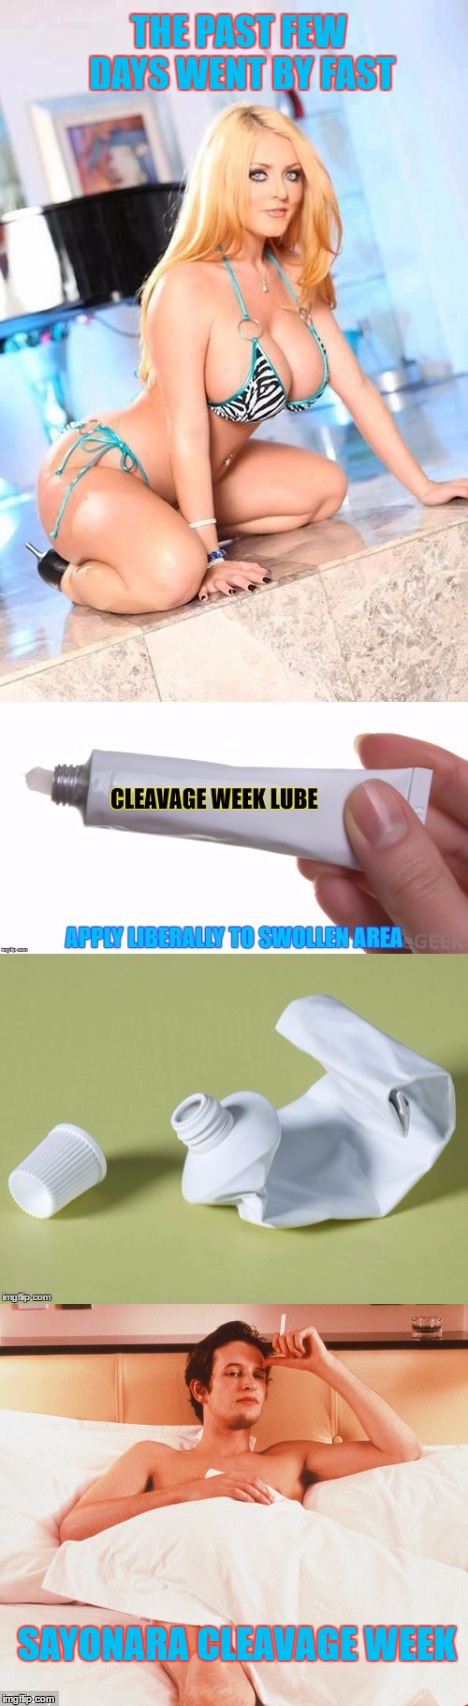 I'm a little shakey - Cleavage Week - A .mushu.thedog event | THE PAST FEW DAYS WENT BY FAST; SAYONARA CLEAVAGE WEEK | image tagged in memes,cleavage week,lotion,smoking,boom boom boobs,sexy women | made w/ Imgflip meme maker